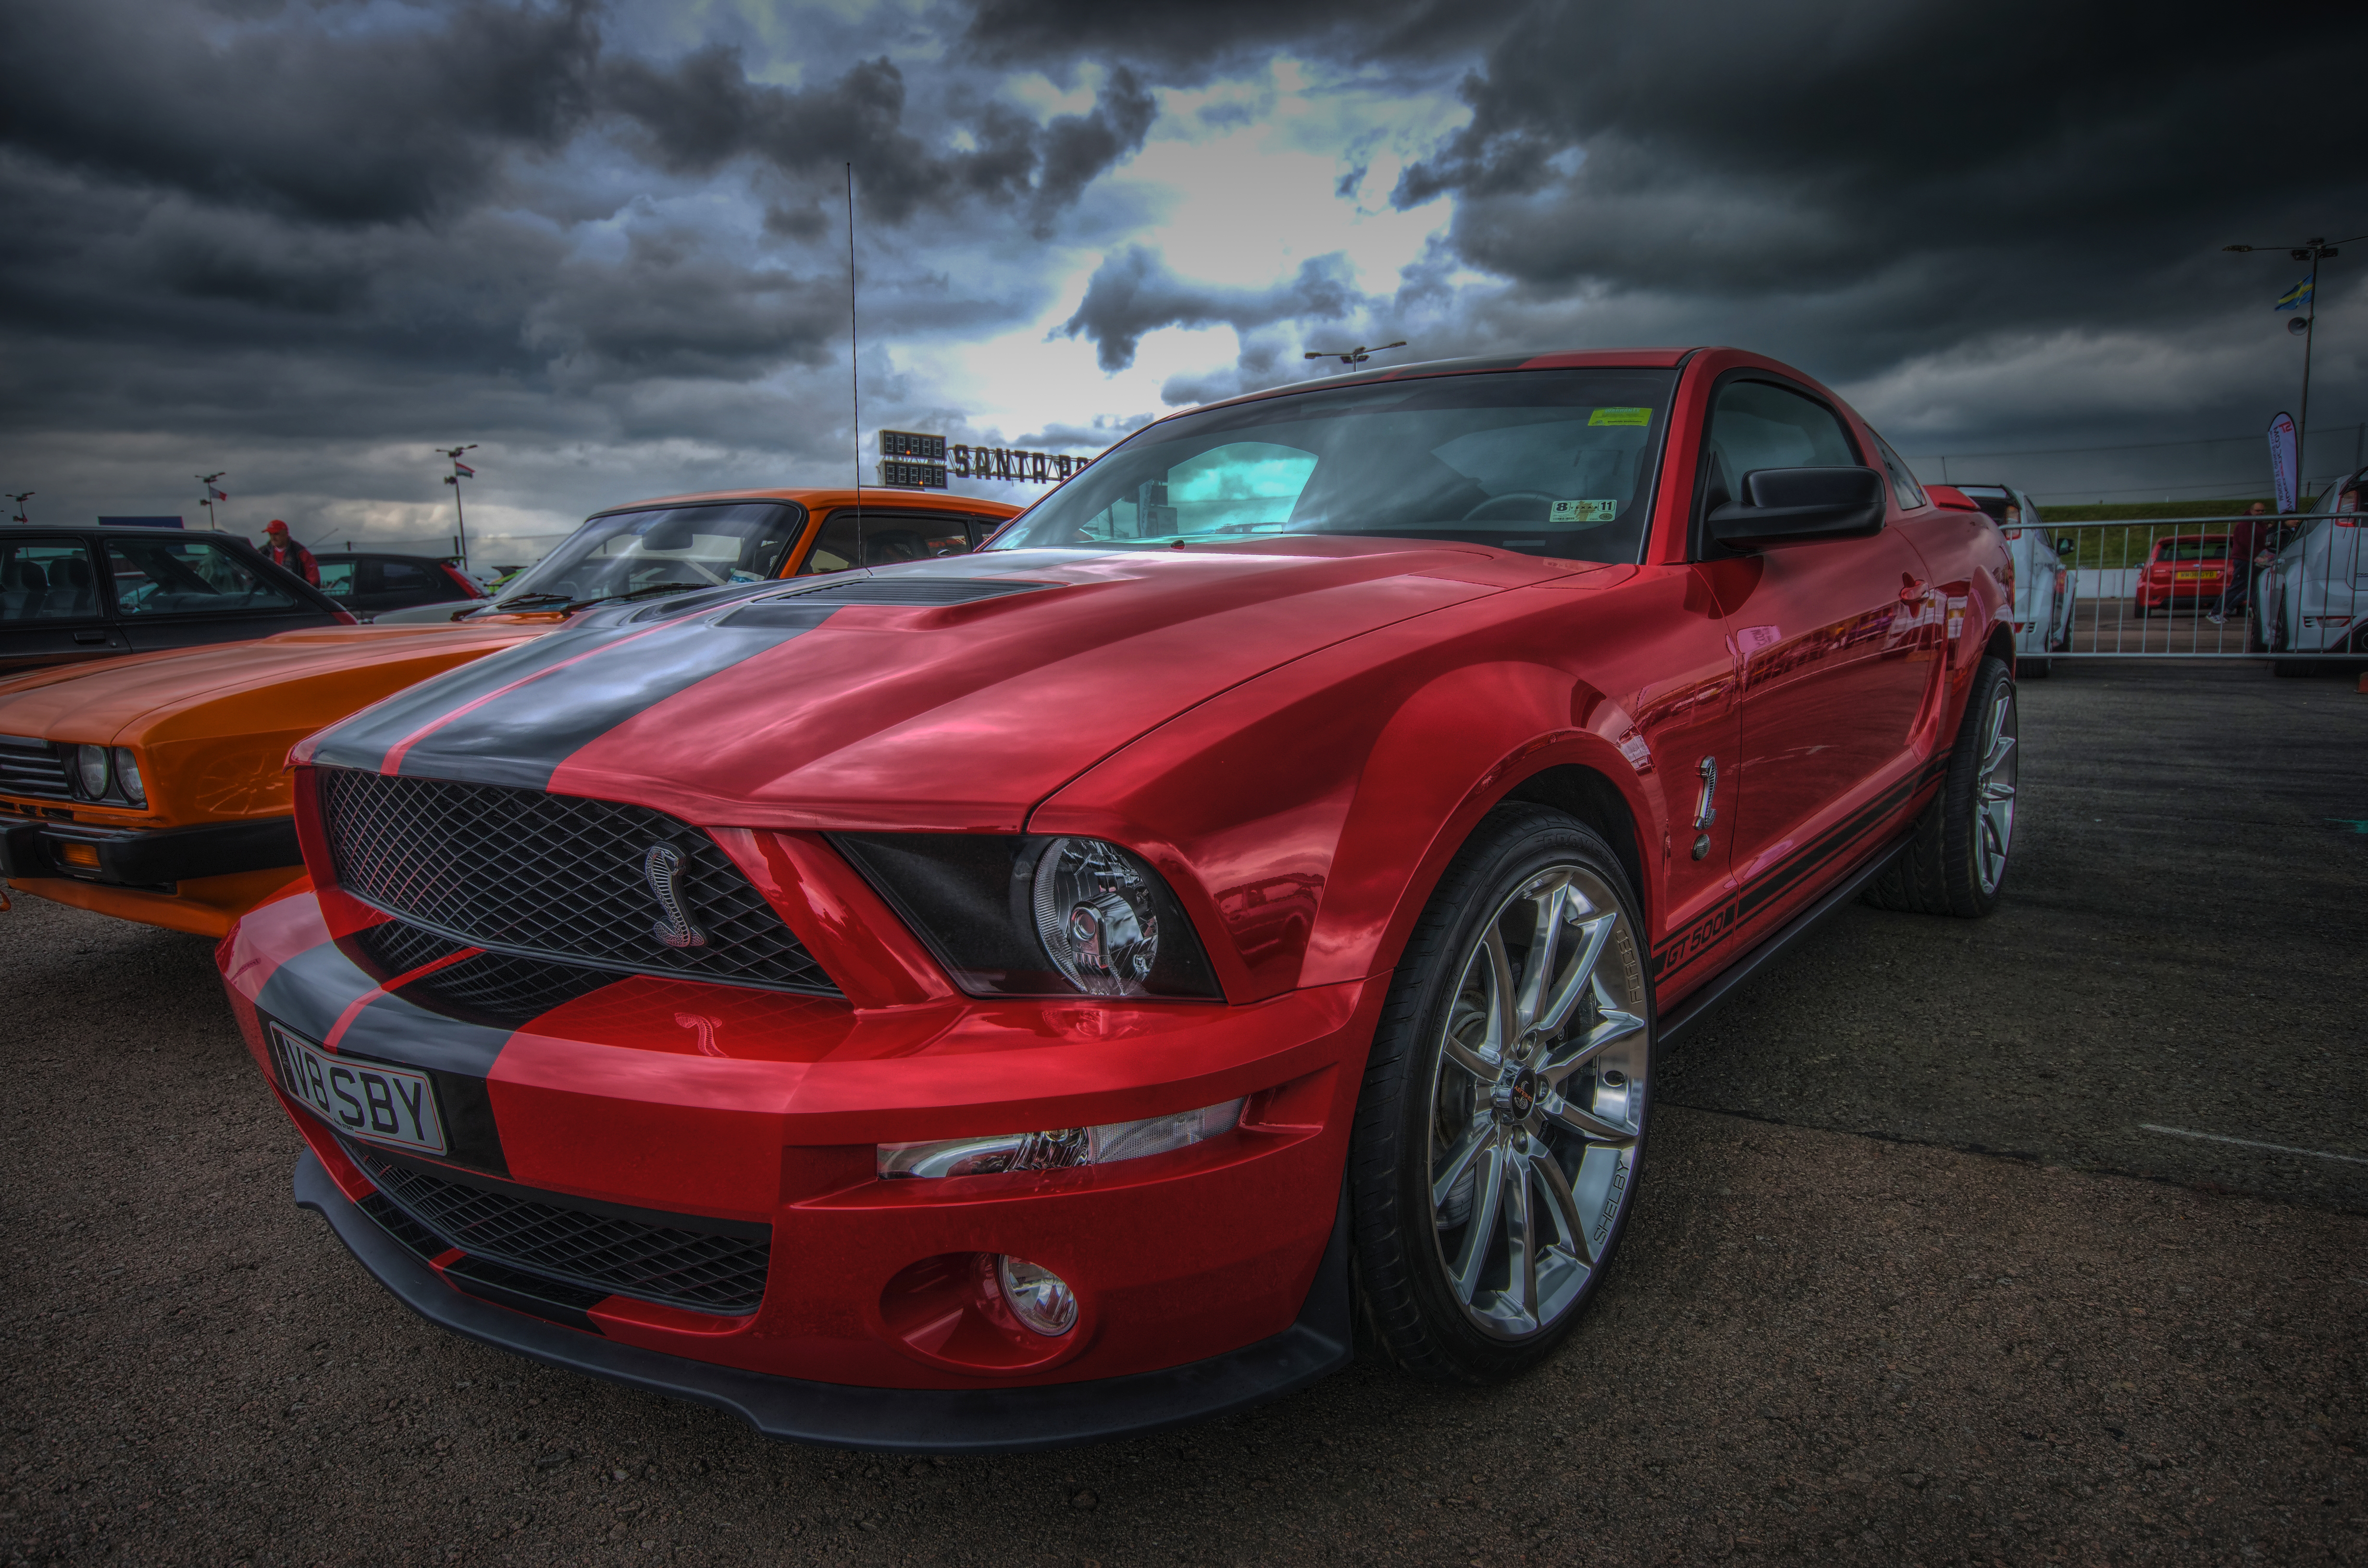 Popular Ford Mustang Shelby Gt500 Image for Phone